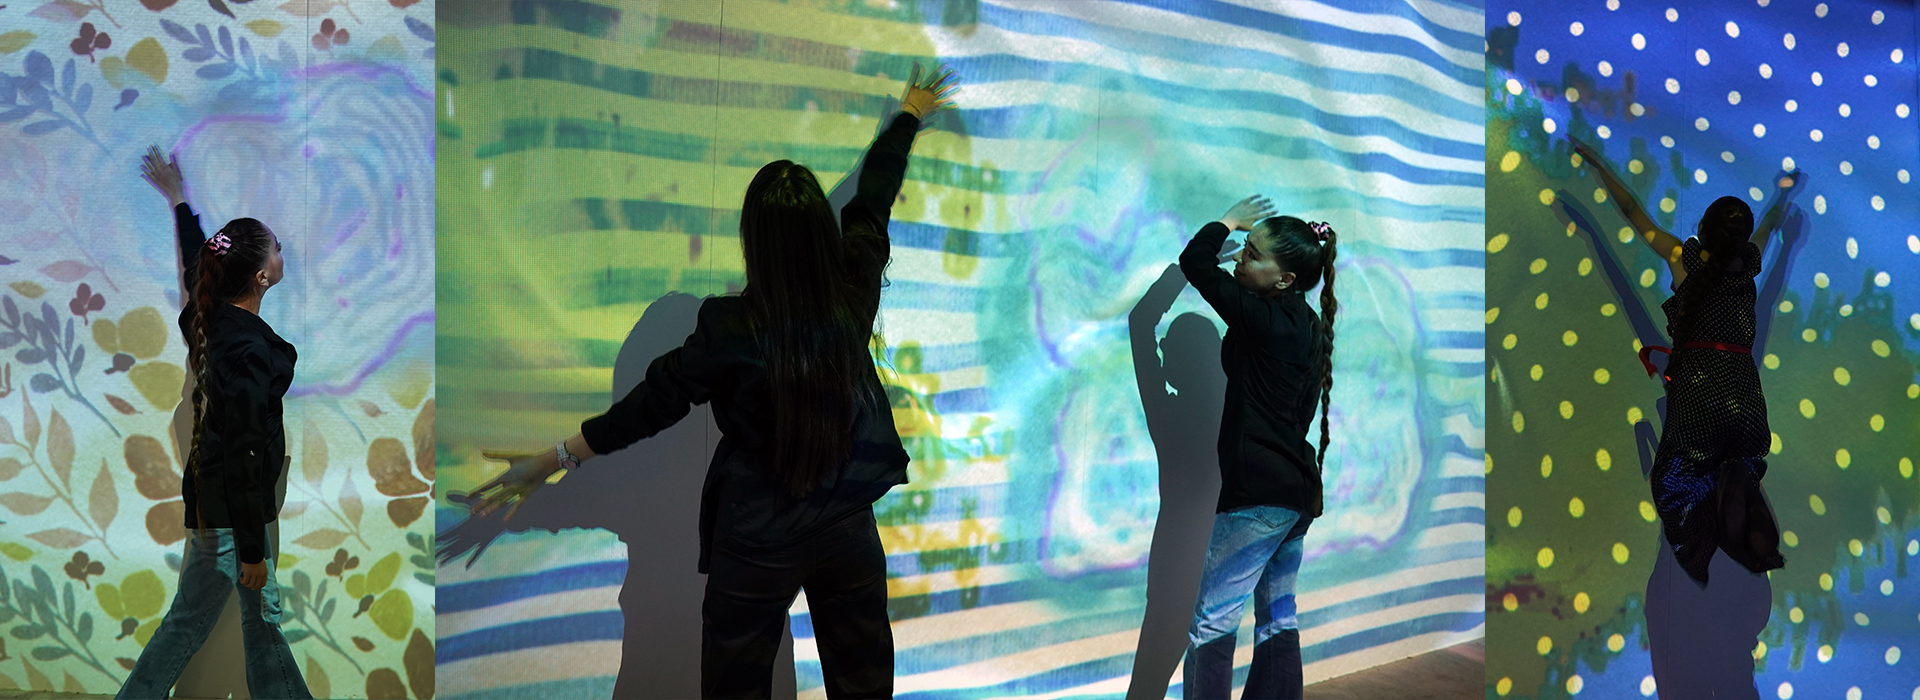 Multiple individuals using hand movements on an interactively generated projection wall with different patterns appearing on the walls.